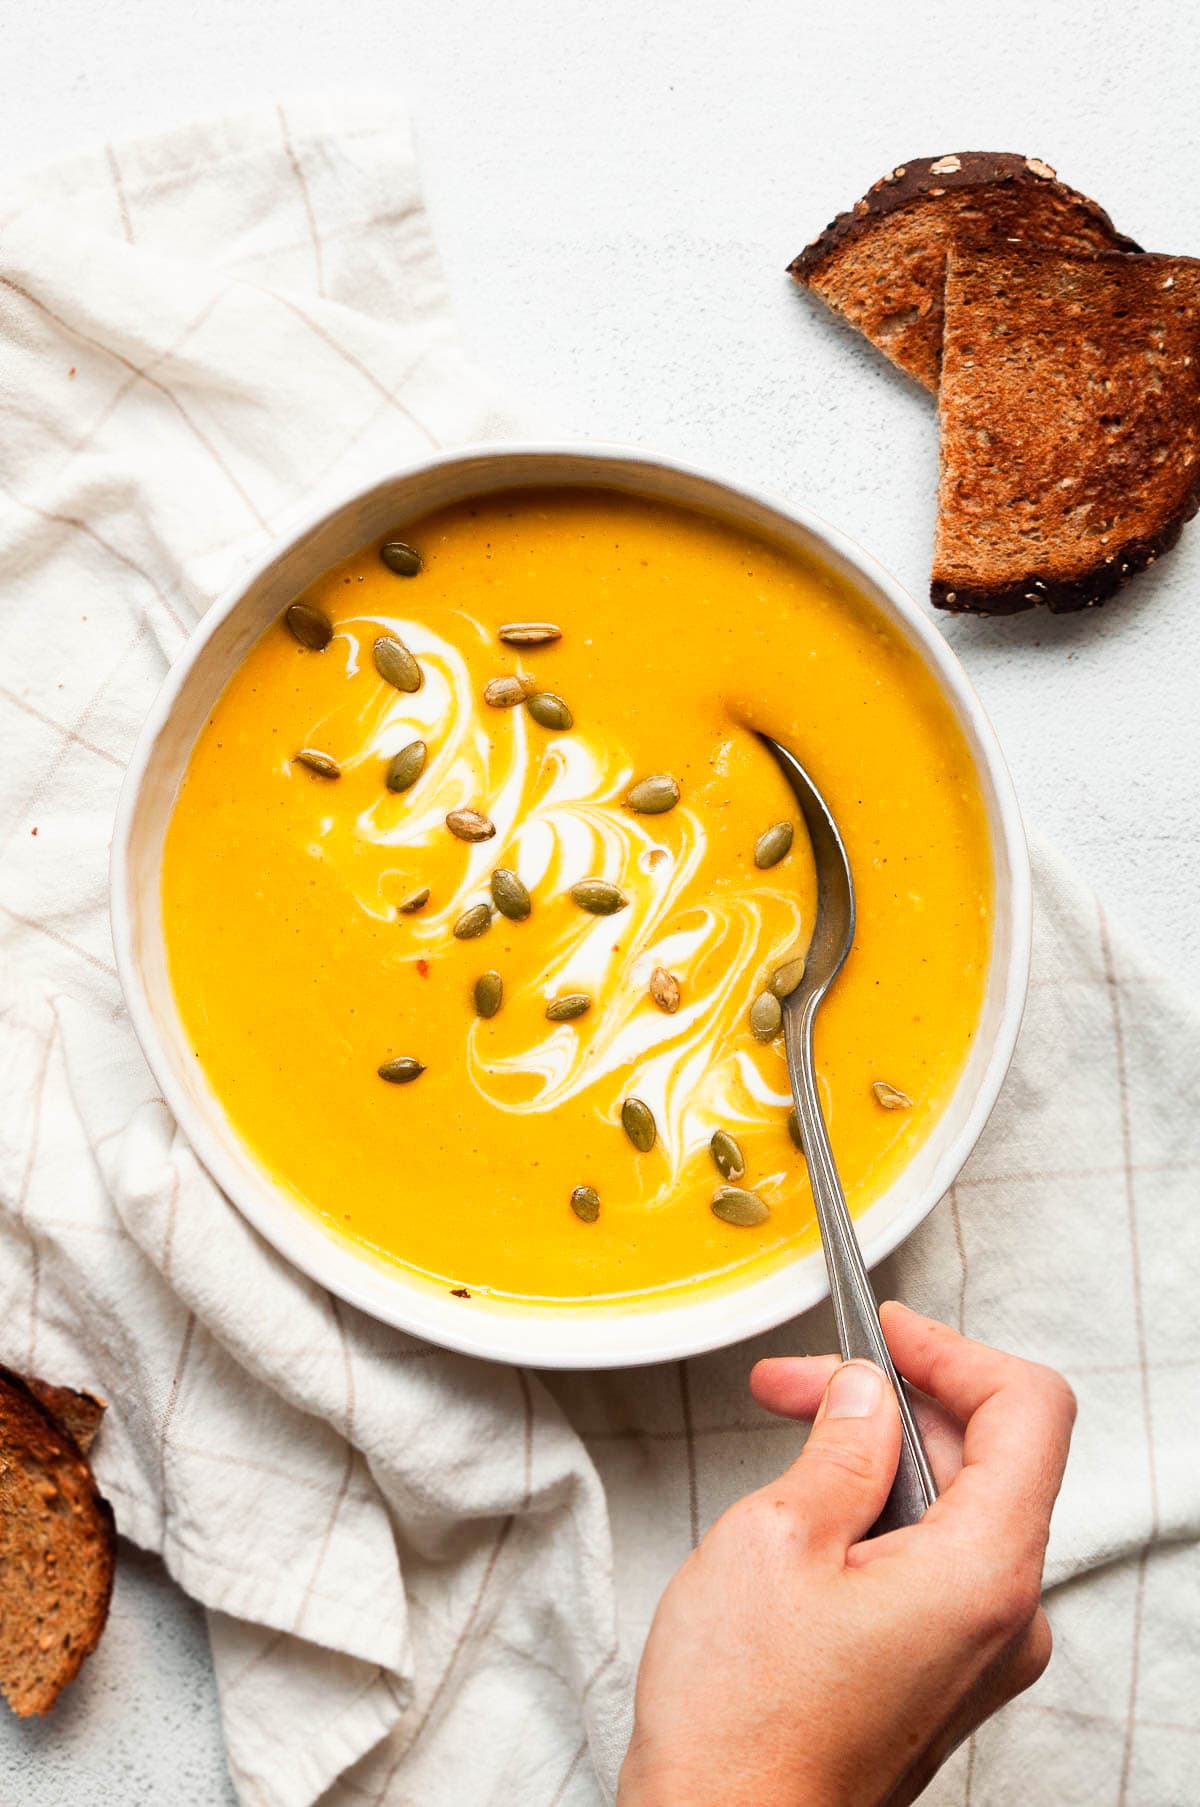 Person dipping a spoon into a bowl with butternut squash soup garnished with cream and pumpkin seeds.